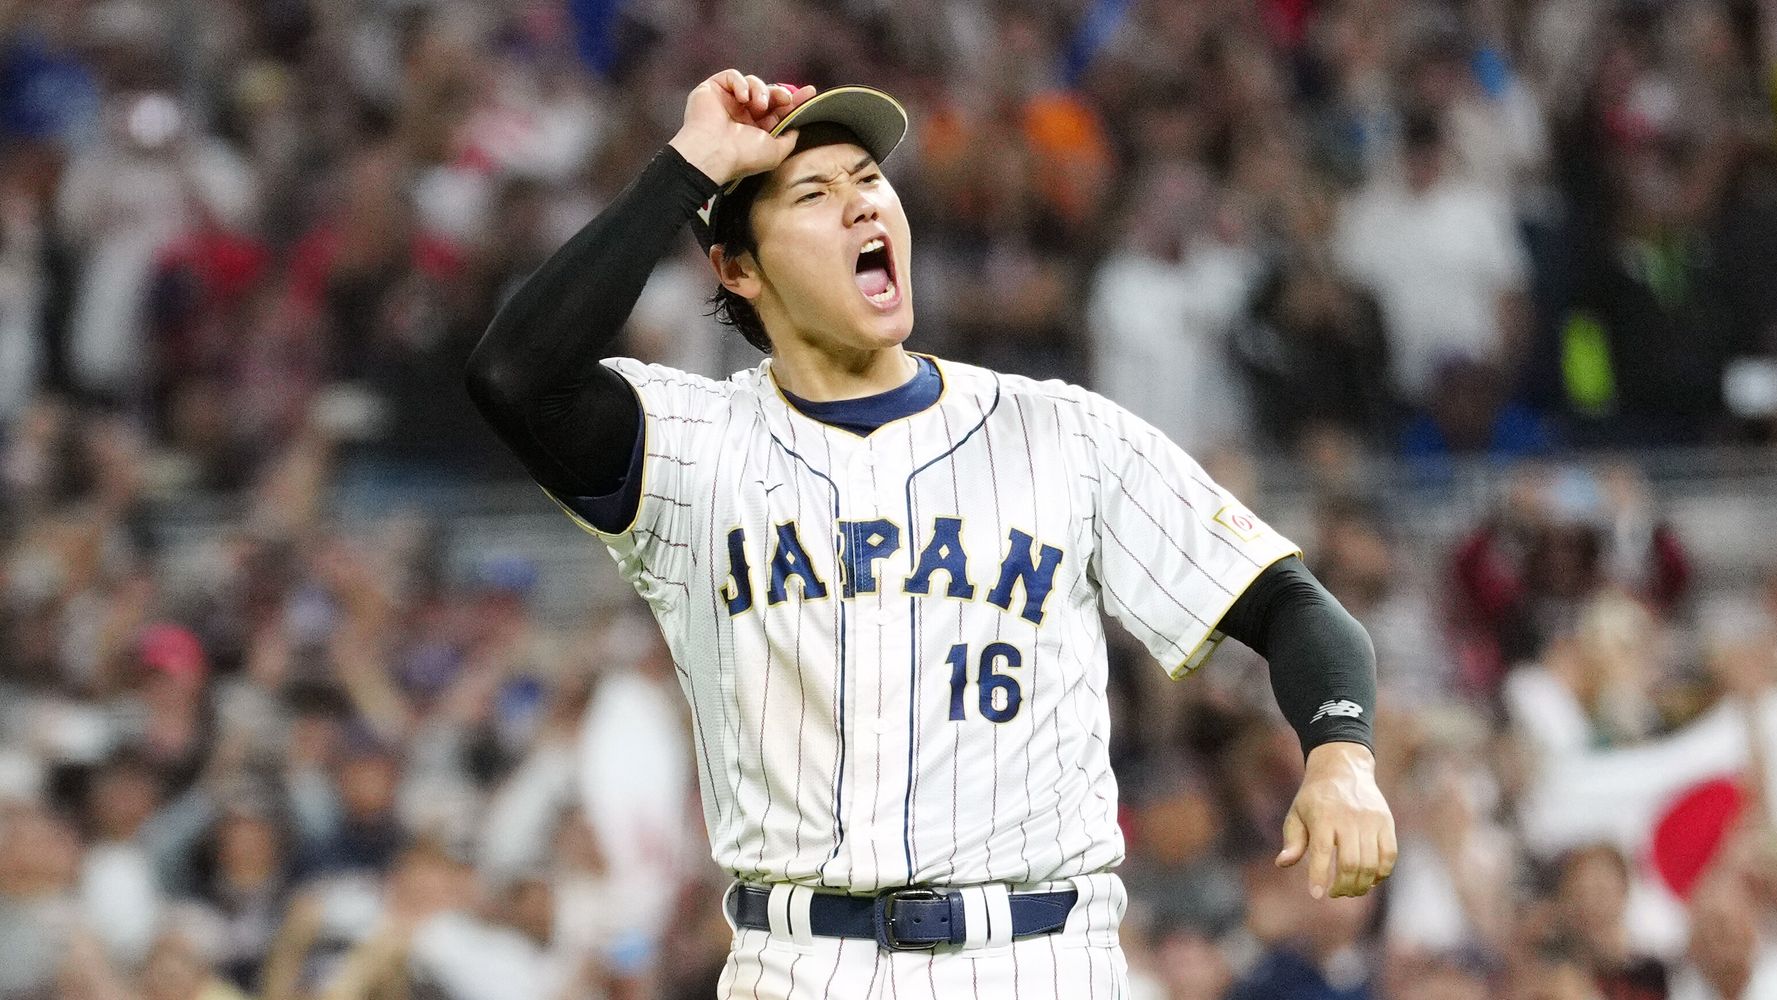 In a storybook ending, Ohtani strikes out Trout at World Baseball